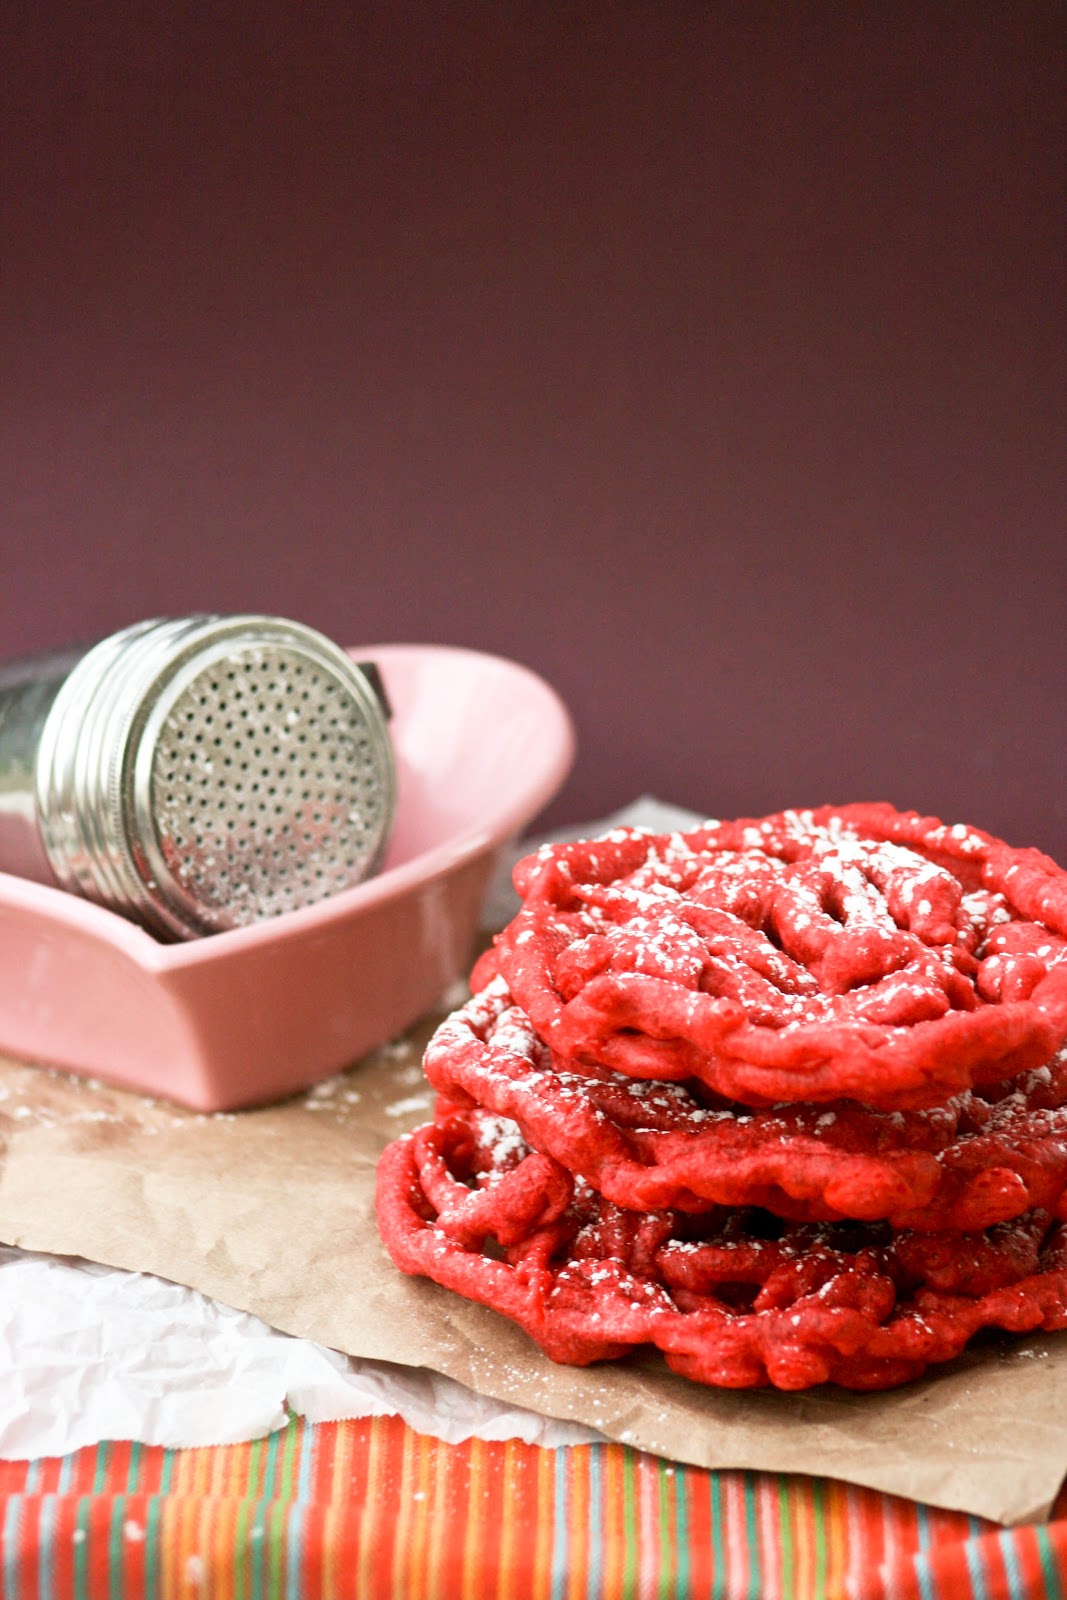 Enjoy your Memorial Day! And these Red Velvet Funnel Cakes!